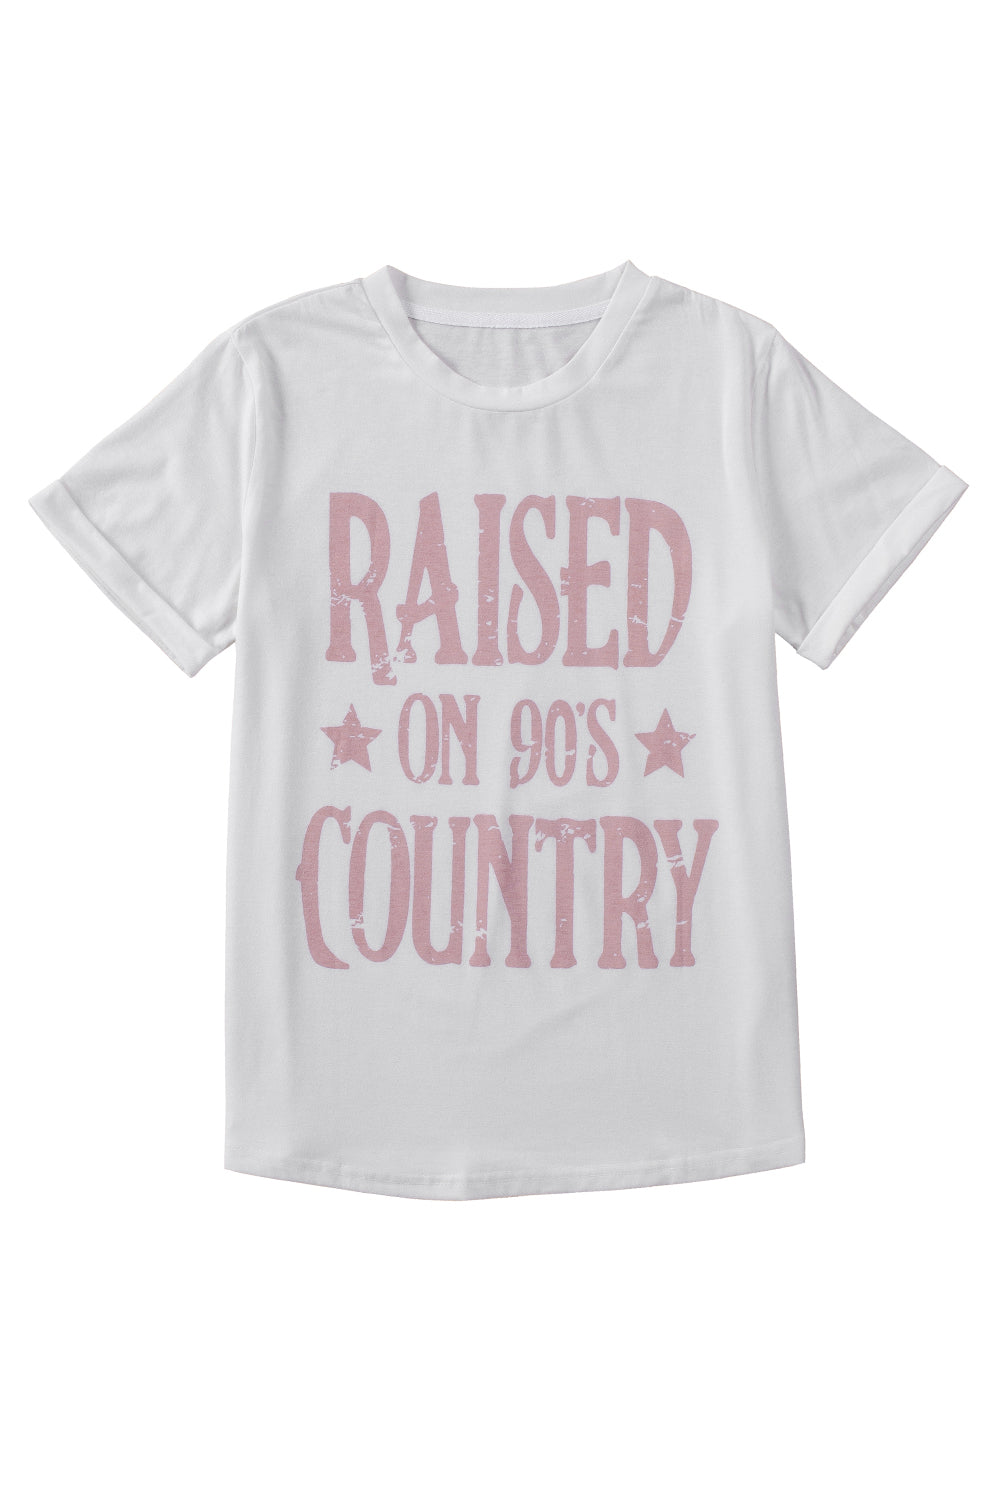 Raised on 90s Country Letter Graphic Tee